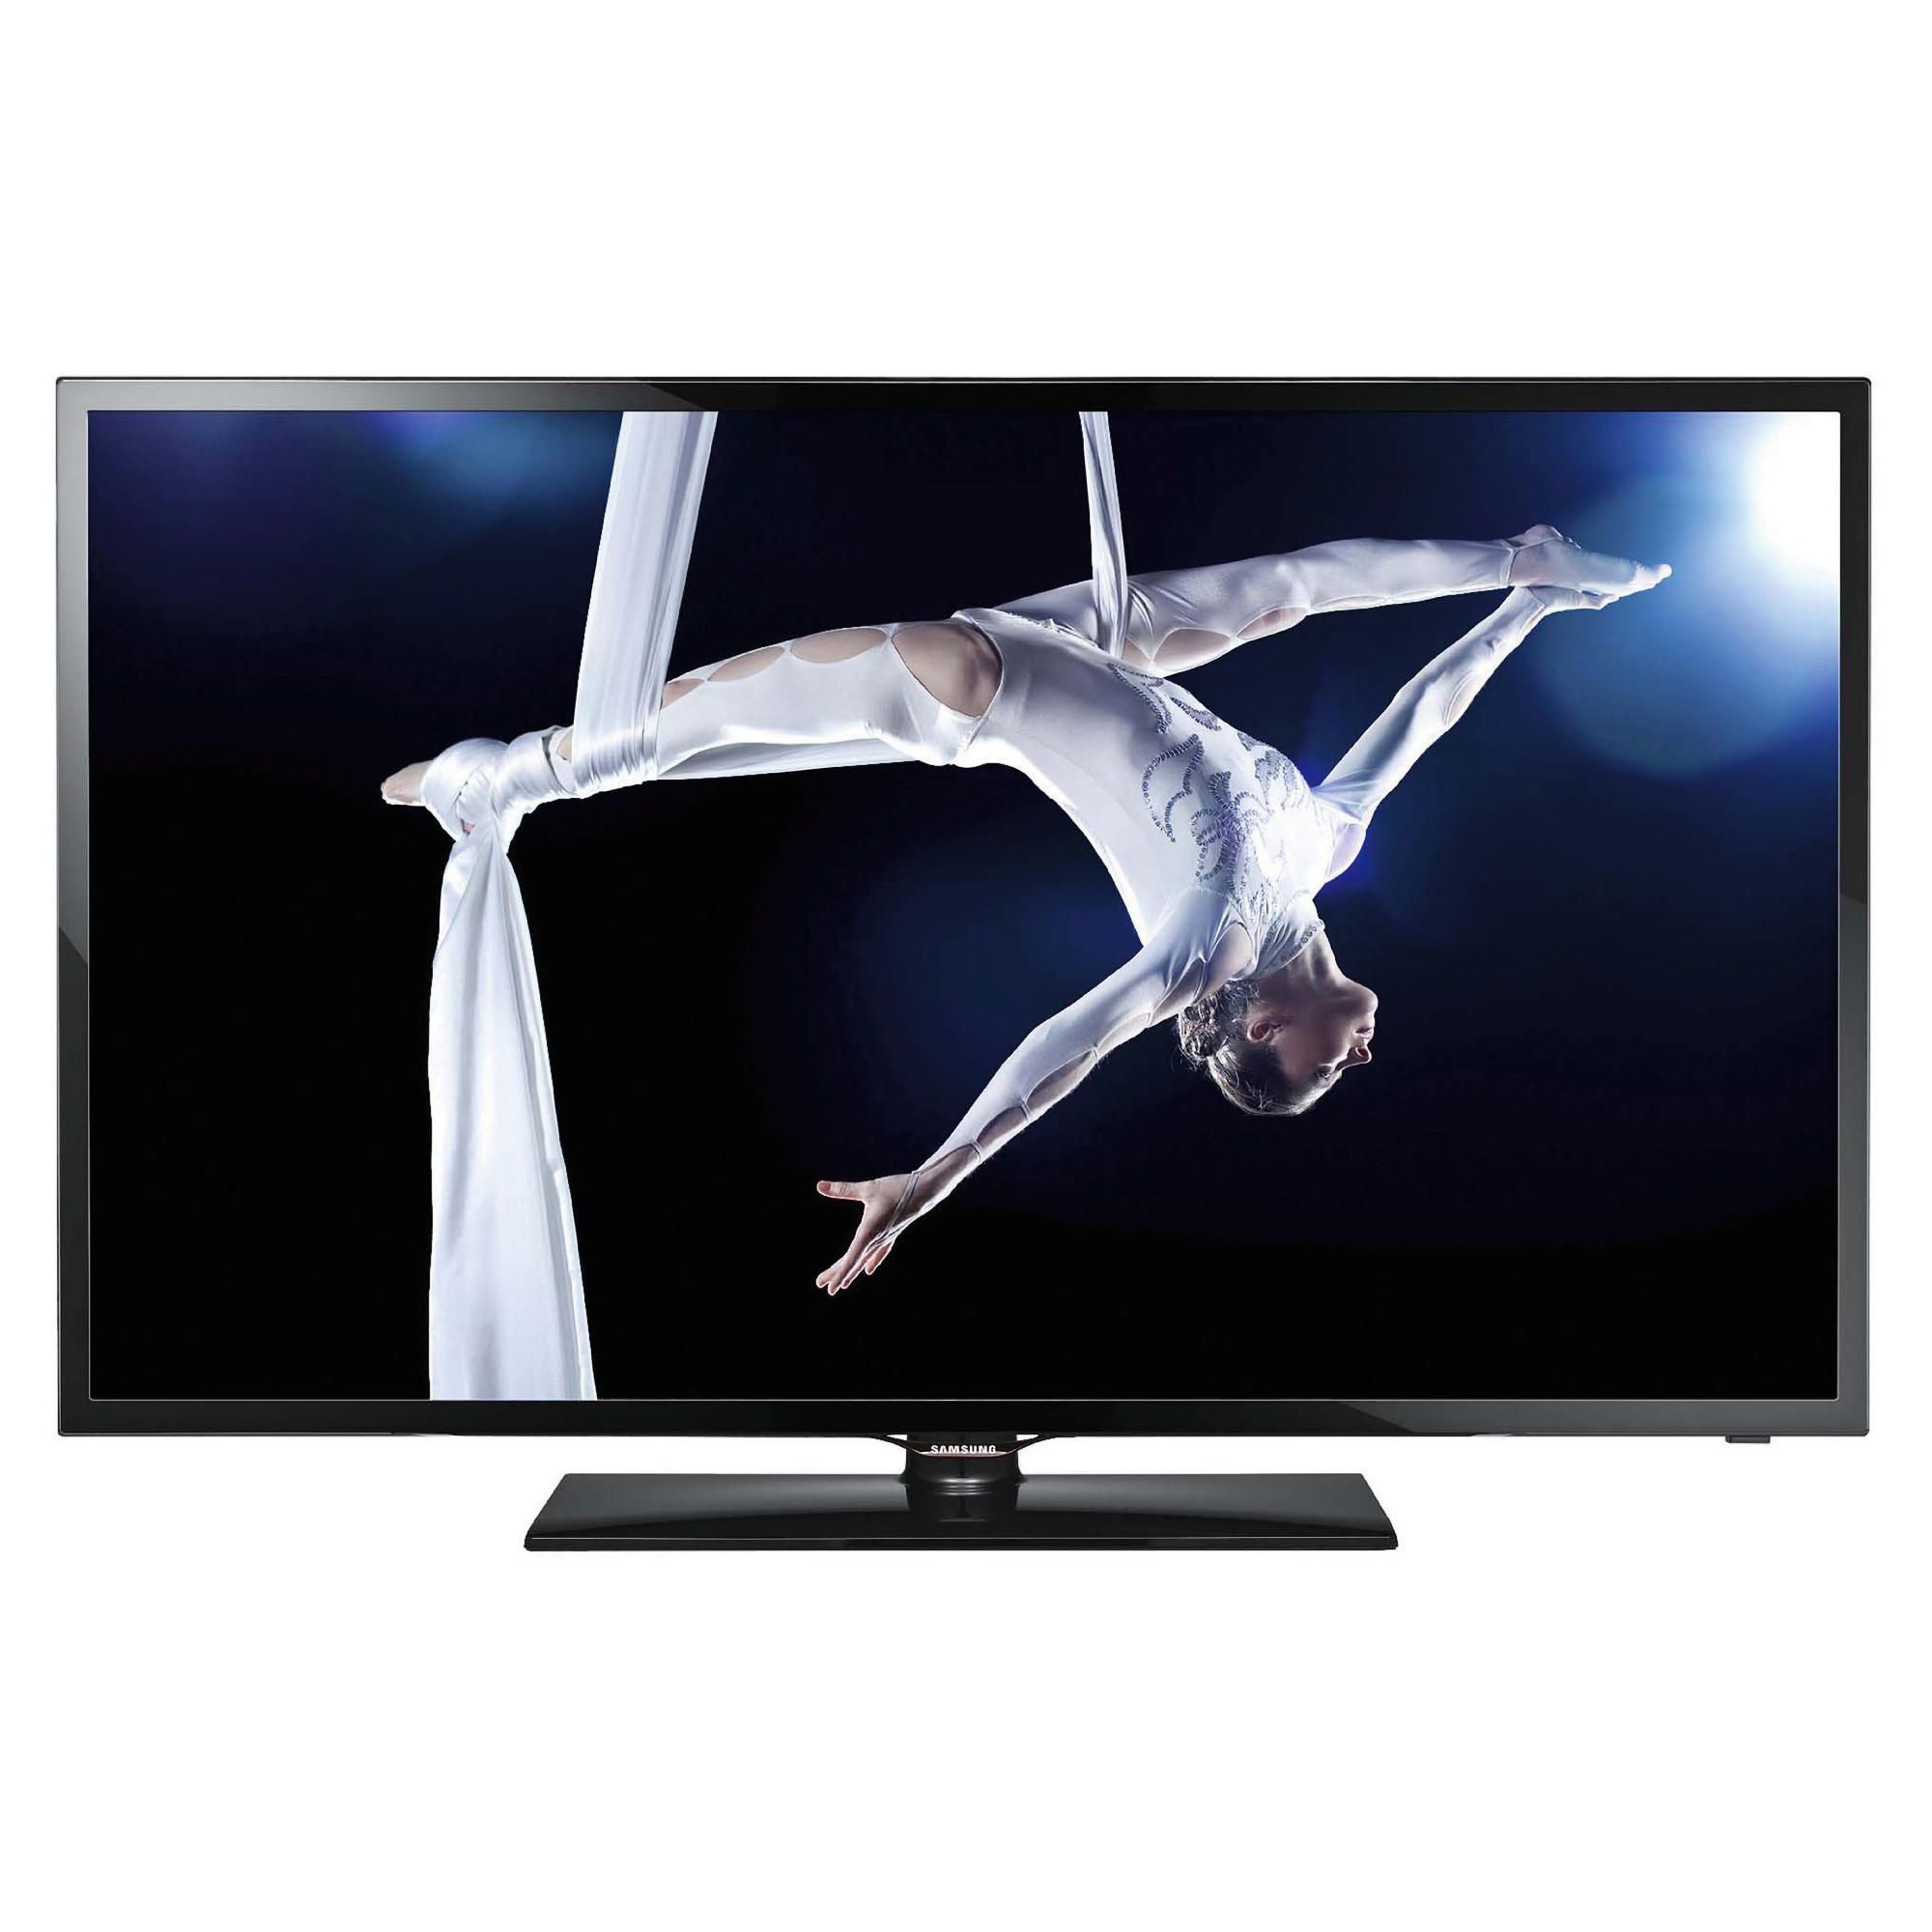 Samsung 22” UE22F5000 Full HD 1080p E-LED TV with Freeview